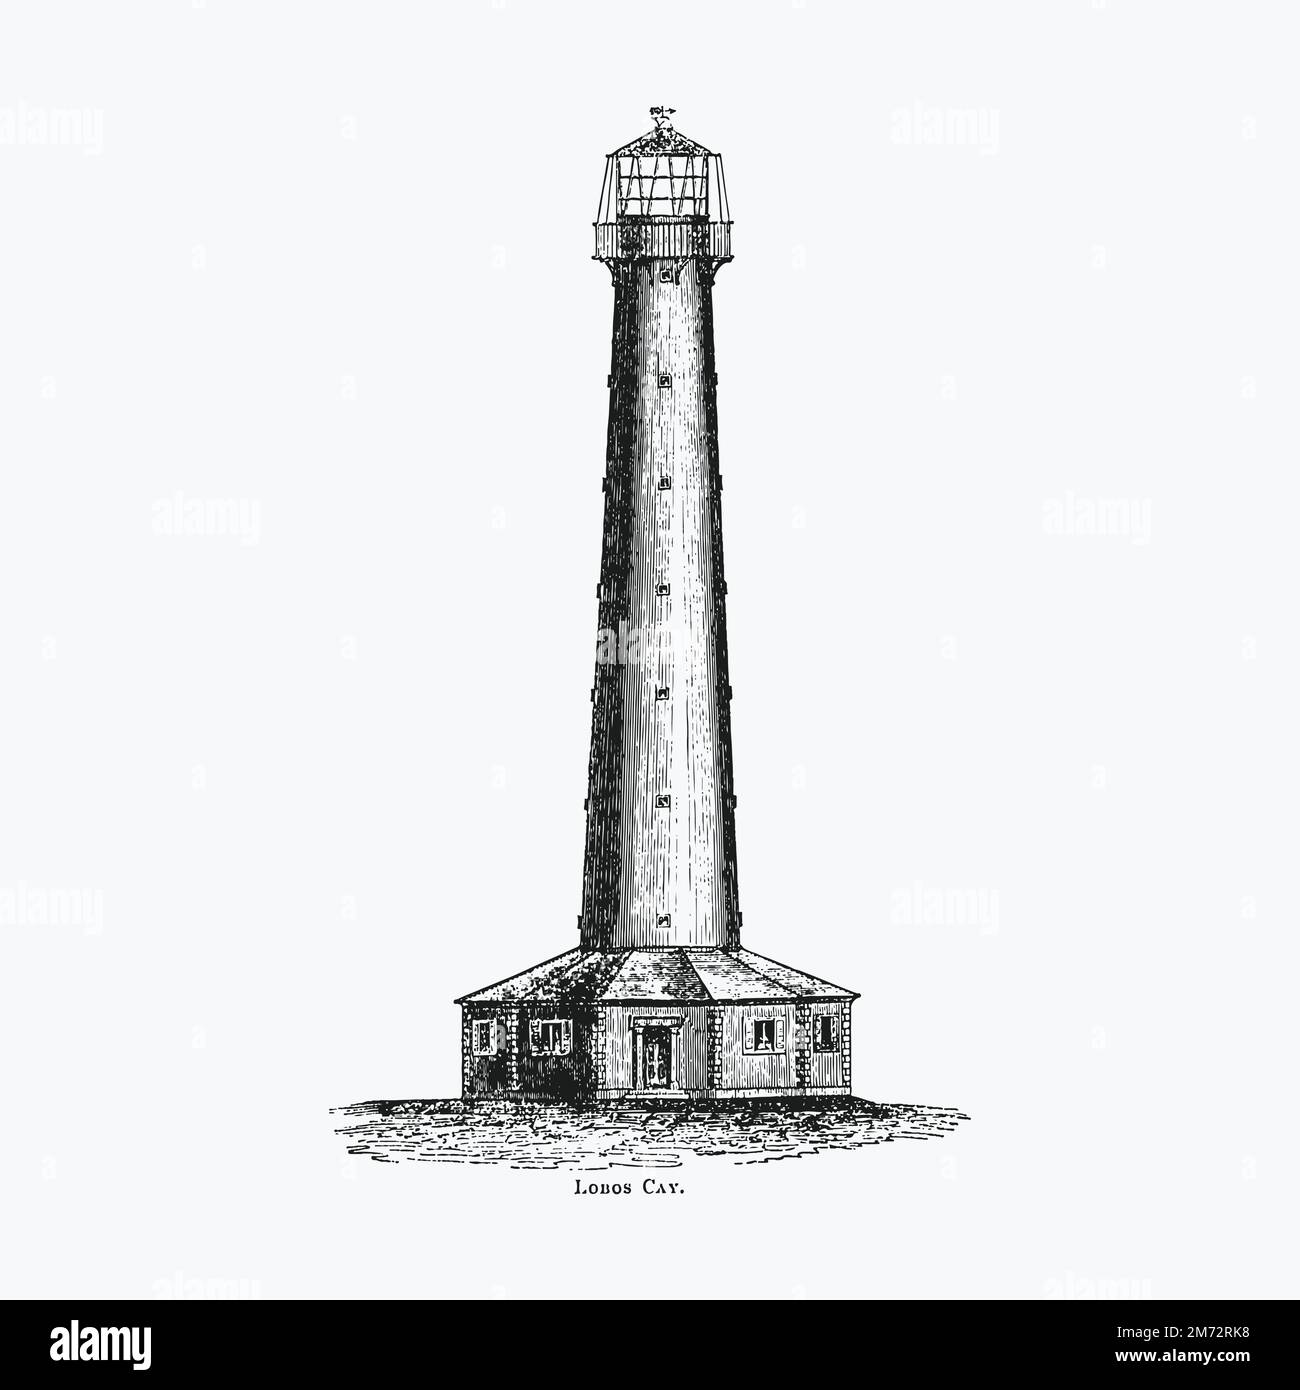 Lobos cay from Circular relating to Lighthouses, Lightships, Buoys, and Beacons (1863) published by Alexander Gordon. Original from the British Librar Stock Vector